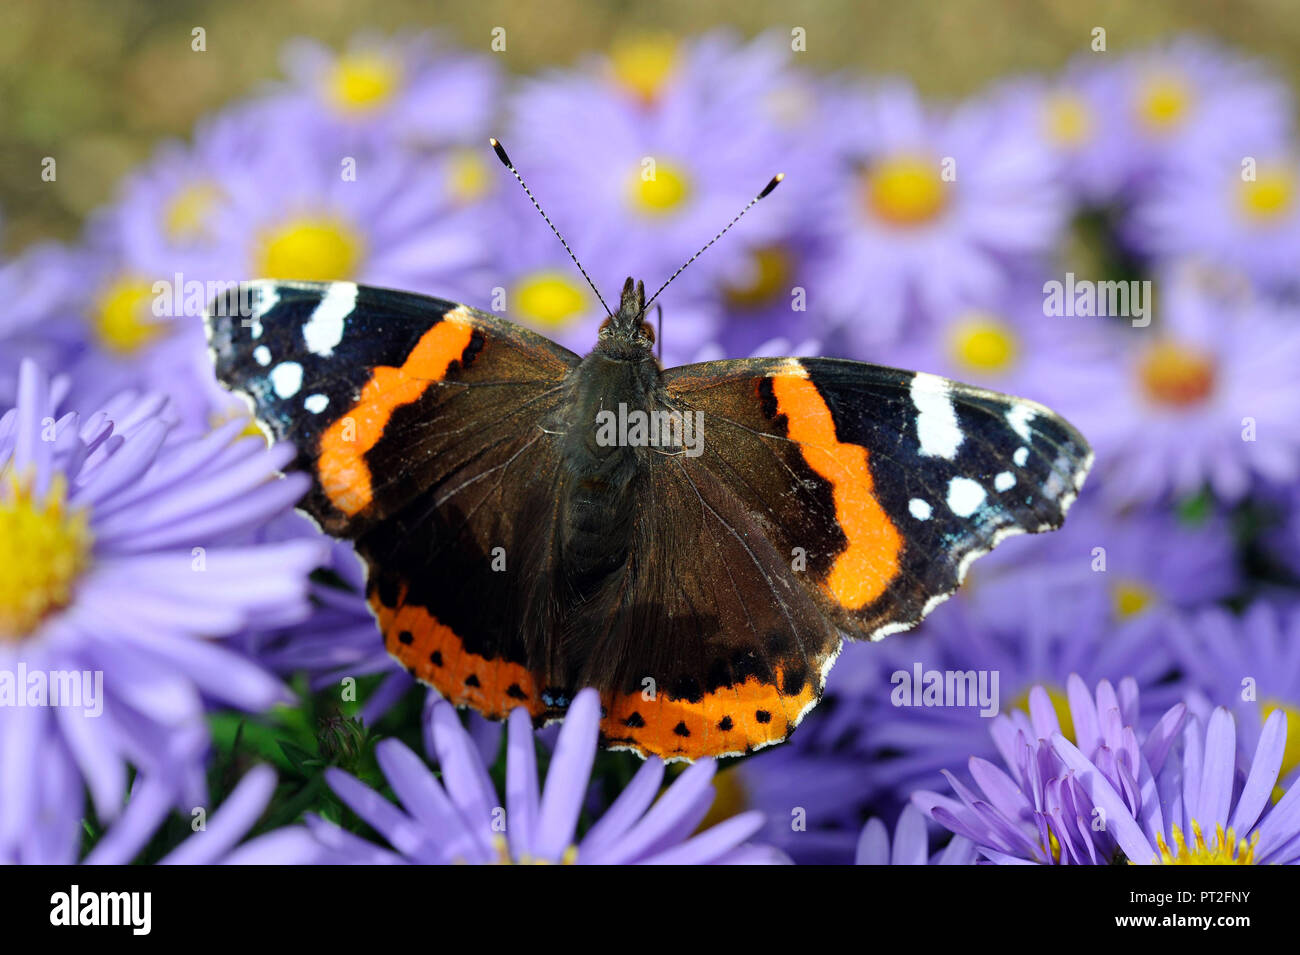 Admiral nibbling nectar on the flowers of the autumn asters in the garden Stock Photo